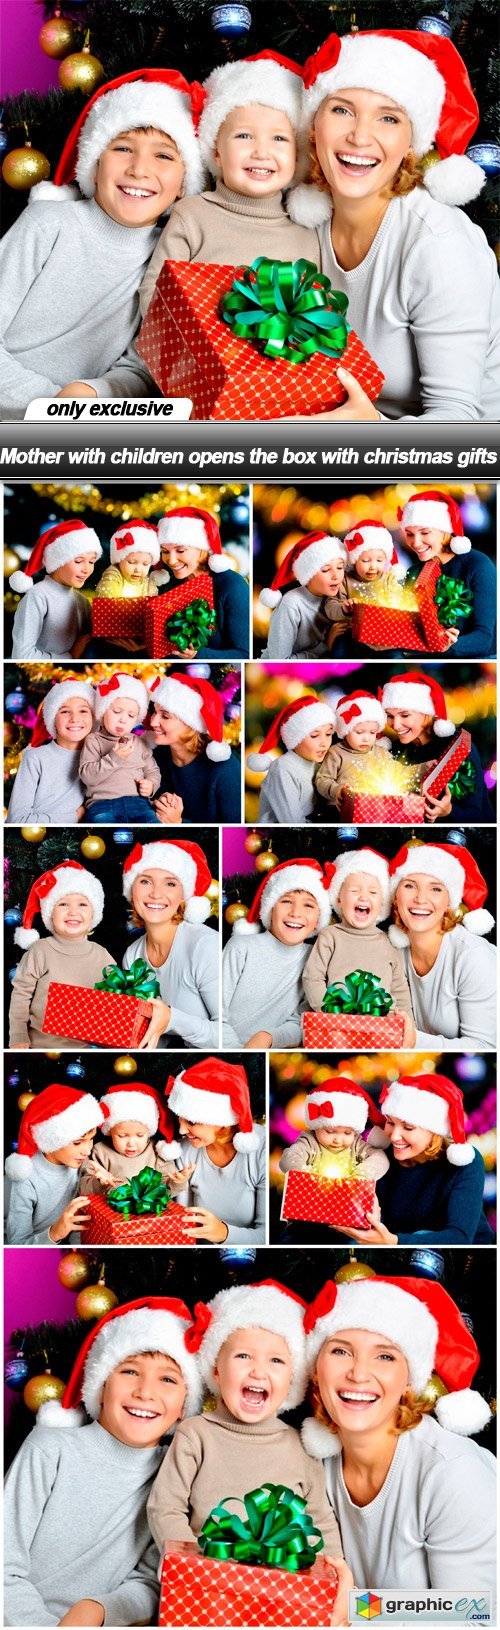 Mother with children opens the box with christmas gifts - 10 UHQ JPEG